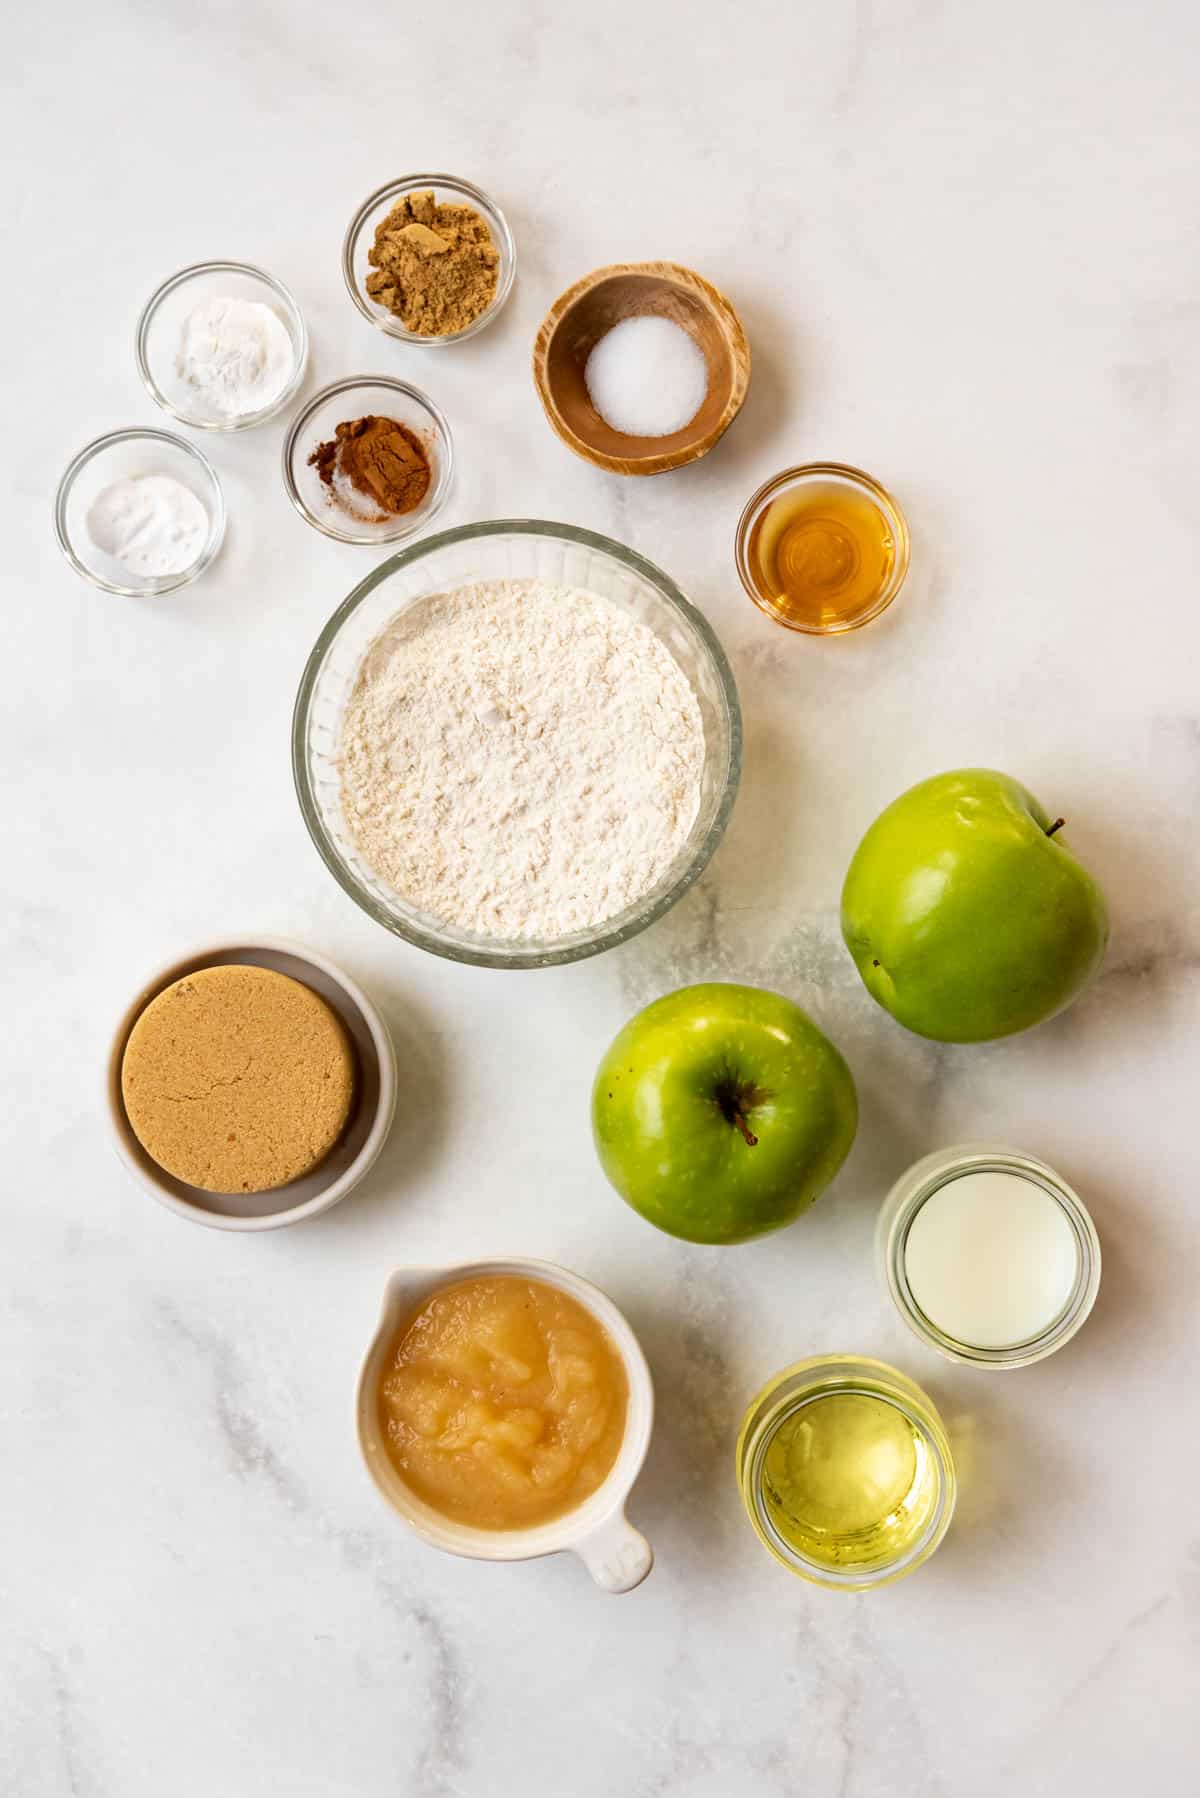 Ingredients for apple ginger quick bread.